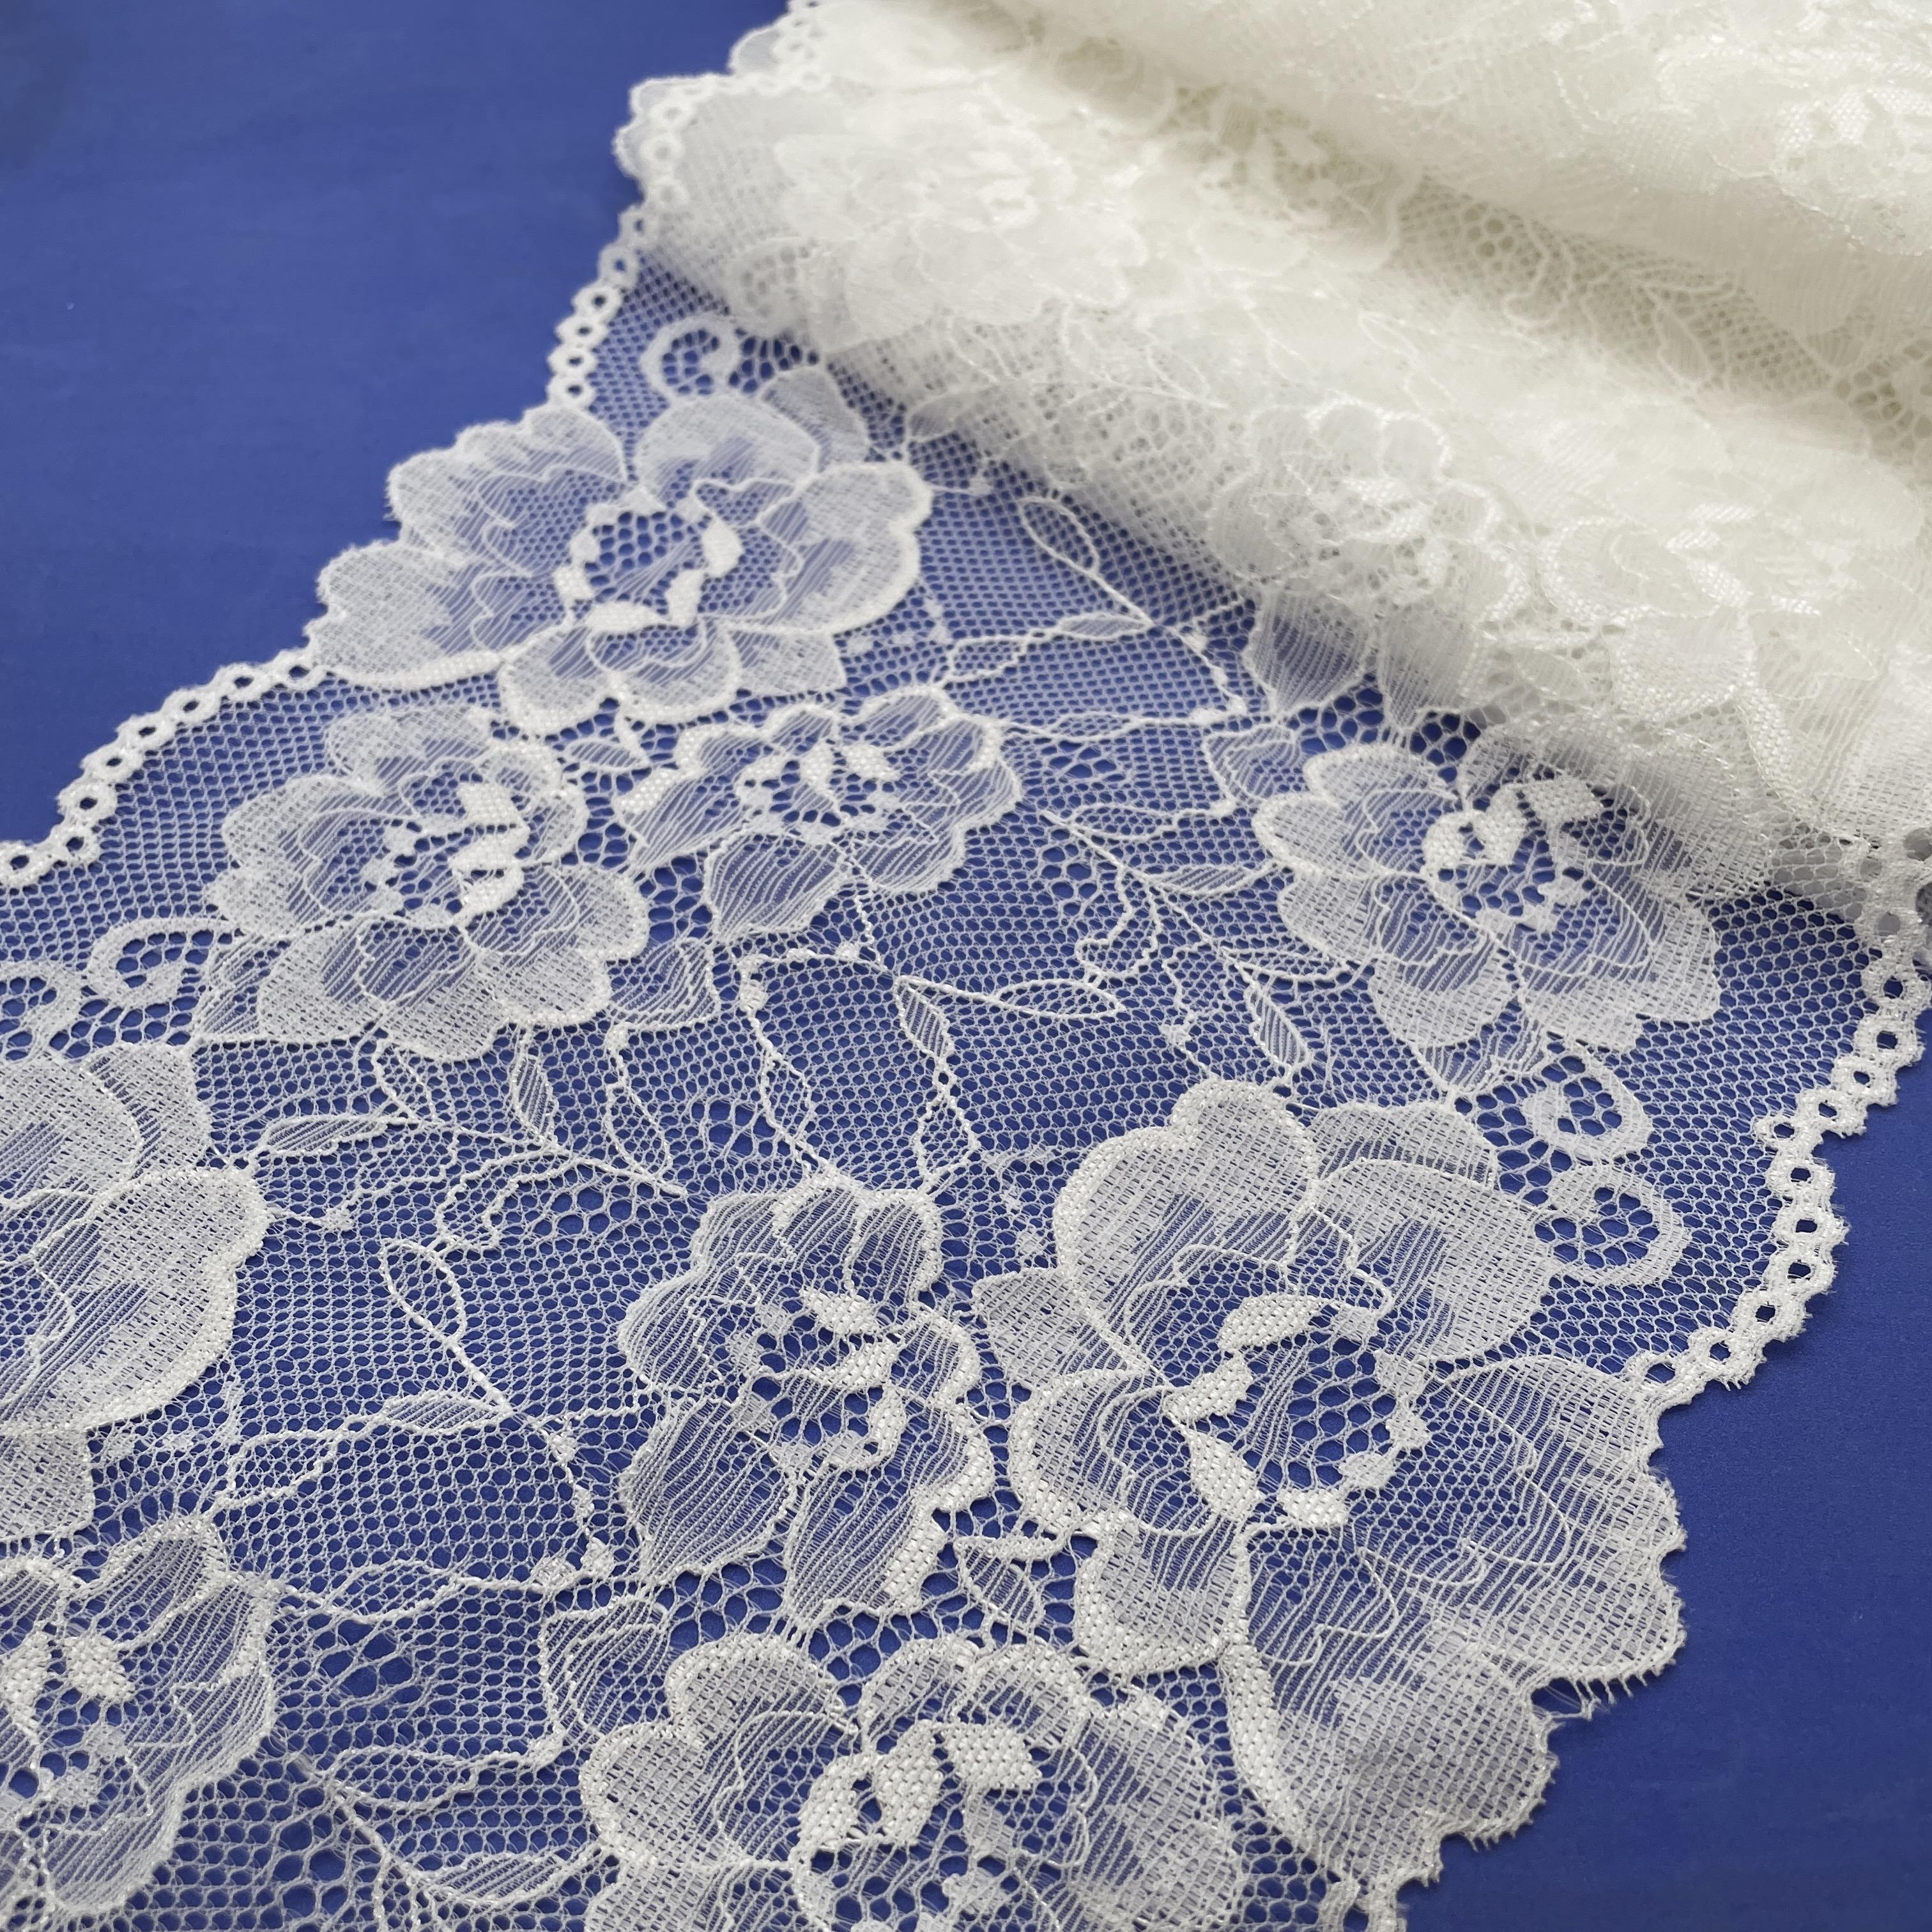 5 Yards Royal Cobalt Blue White Galloon Sheer Stretch Sewing Lace 5.75  Wide Pattern Embroidery Sewing Fabric Delicate Clothing Garment Supply